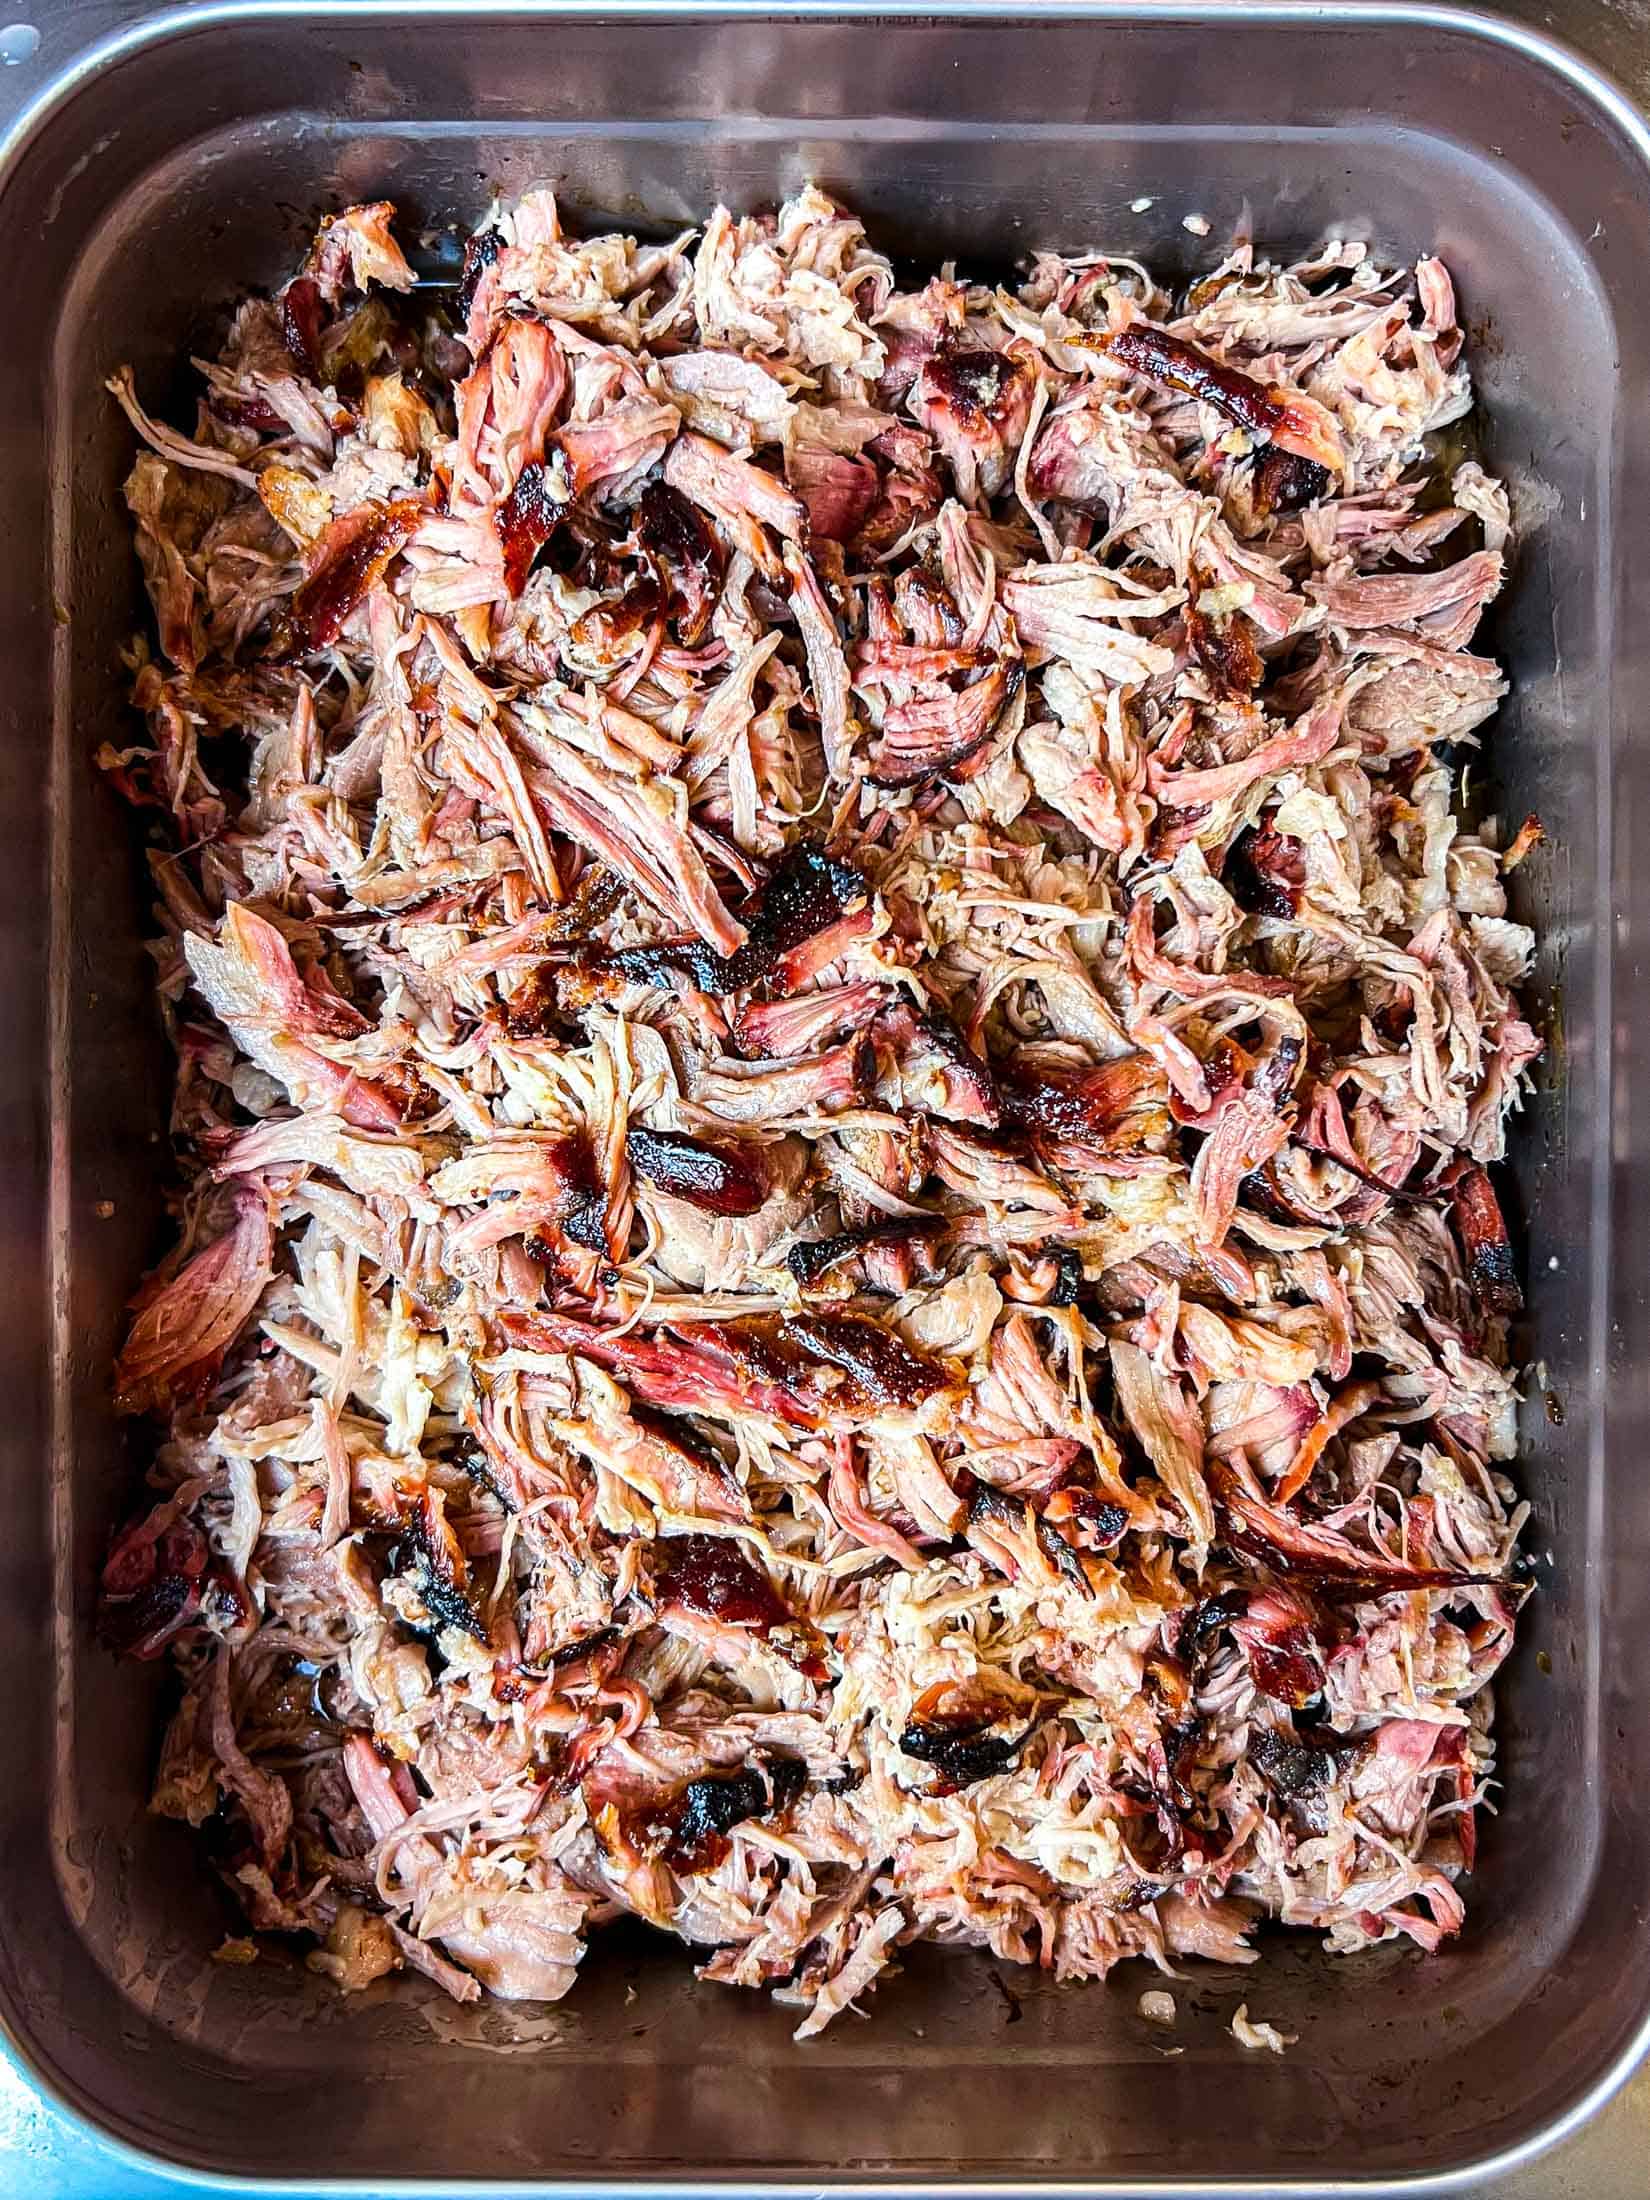 Shredded smoked pork butt in a chafing pan.